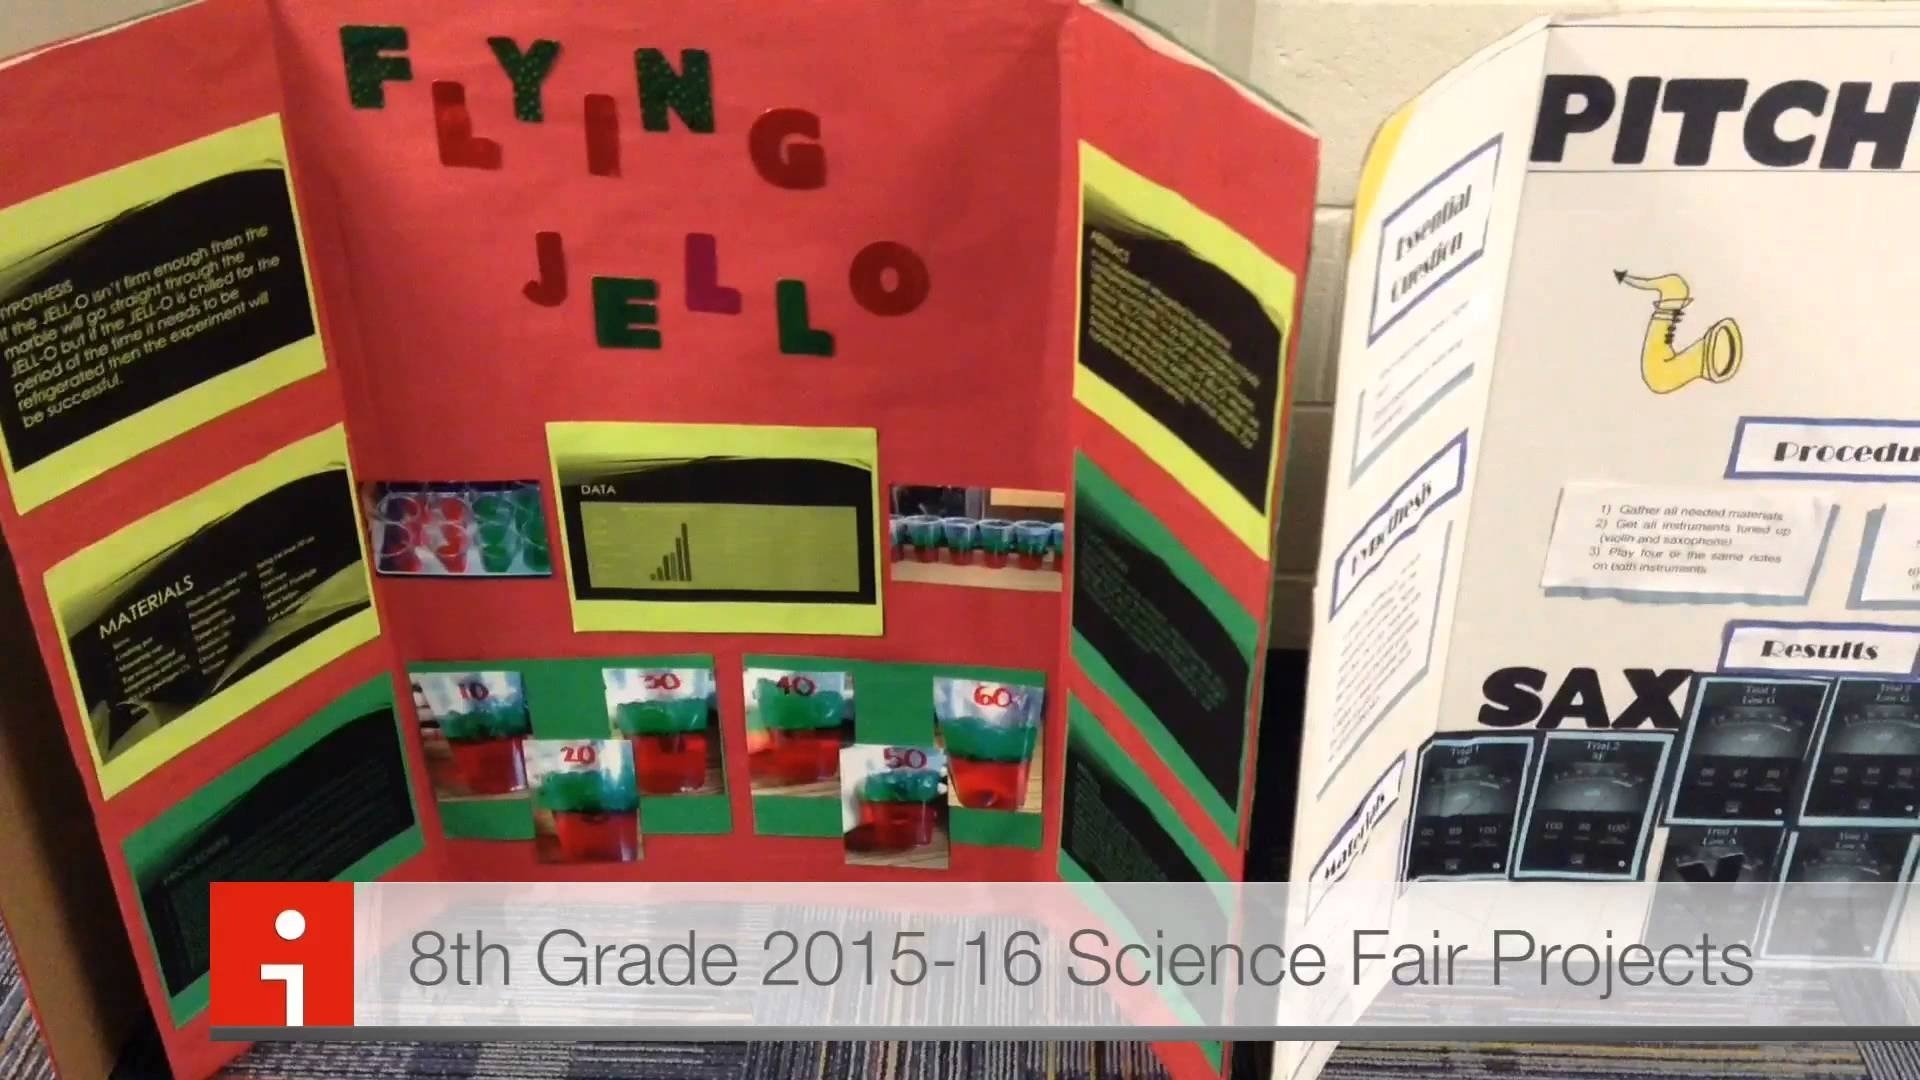 10 Beautiful Science Fair Project Ideas For 8Th Graders 2015 16 8th grade science fair projects youtube 5 2022